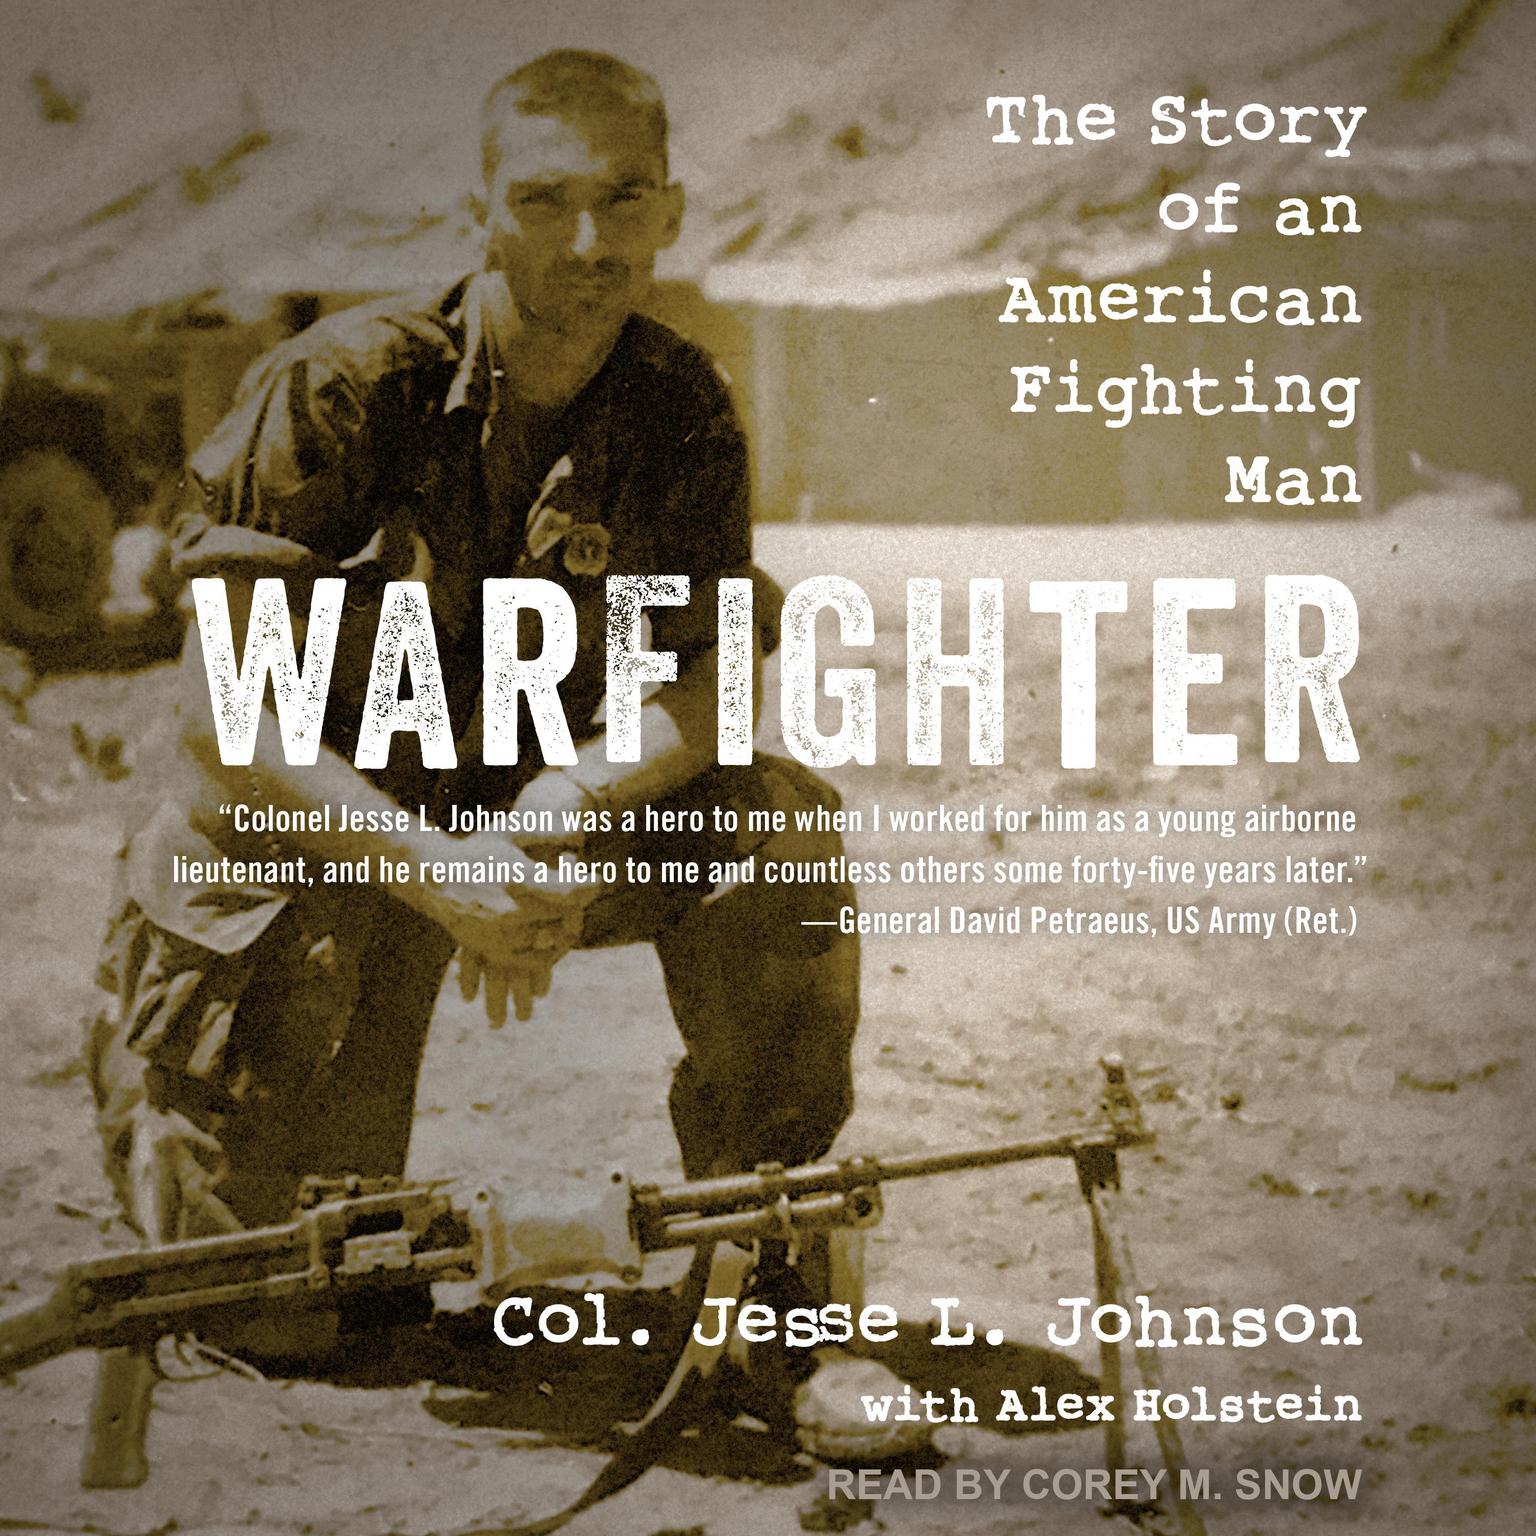 Warfighter: The Story of an American Fighting Man Audiobook, by Col Jesse L. Johnson